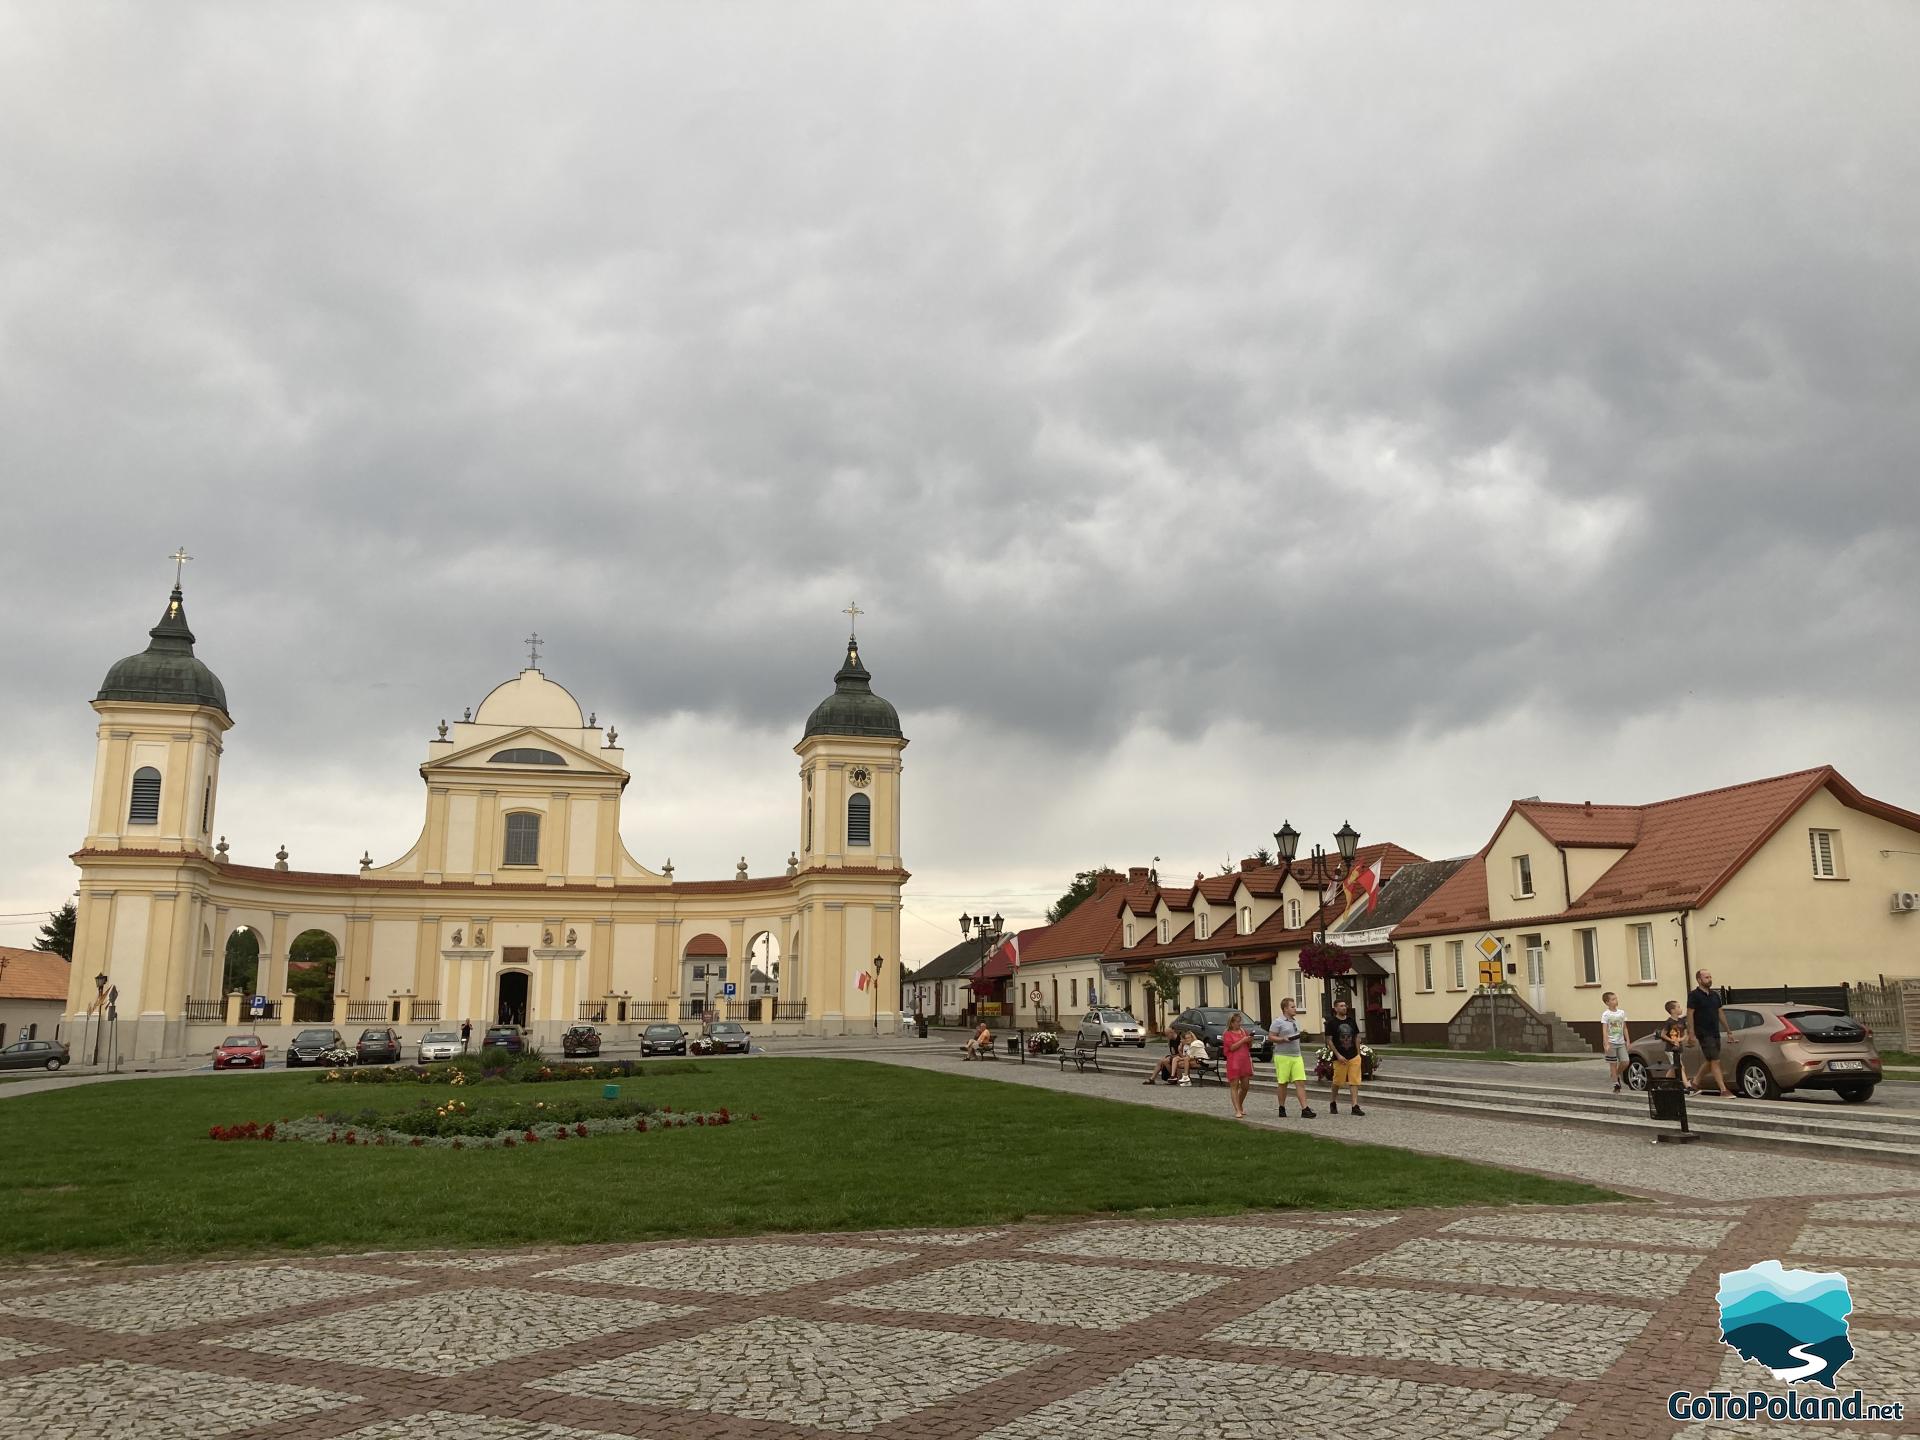 a main square with a yellow church